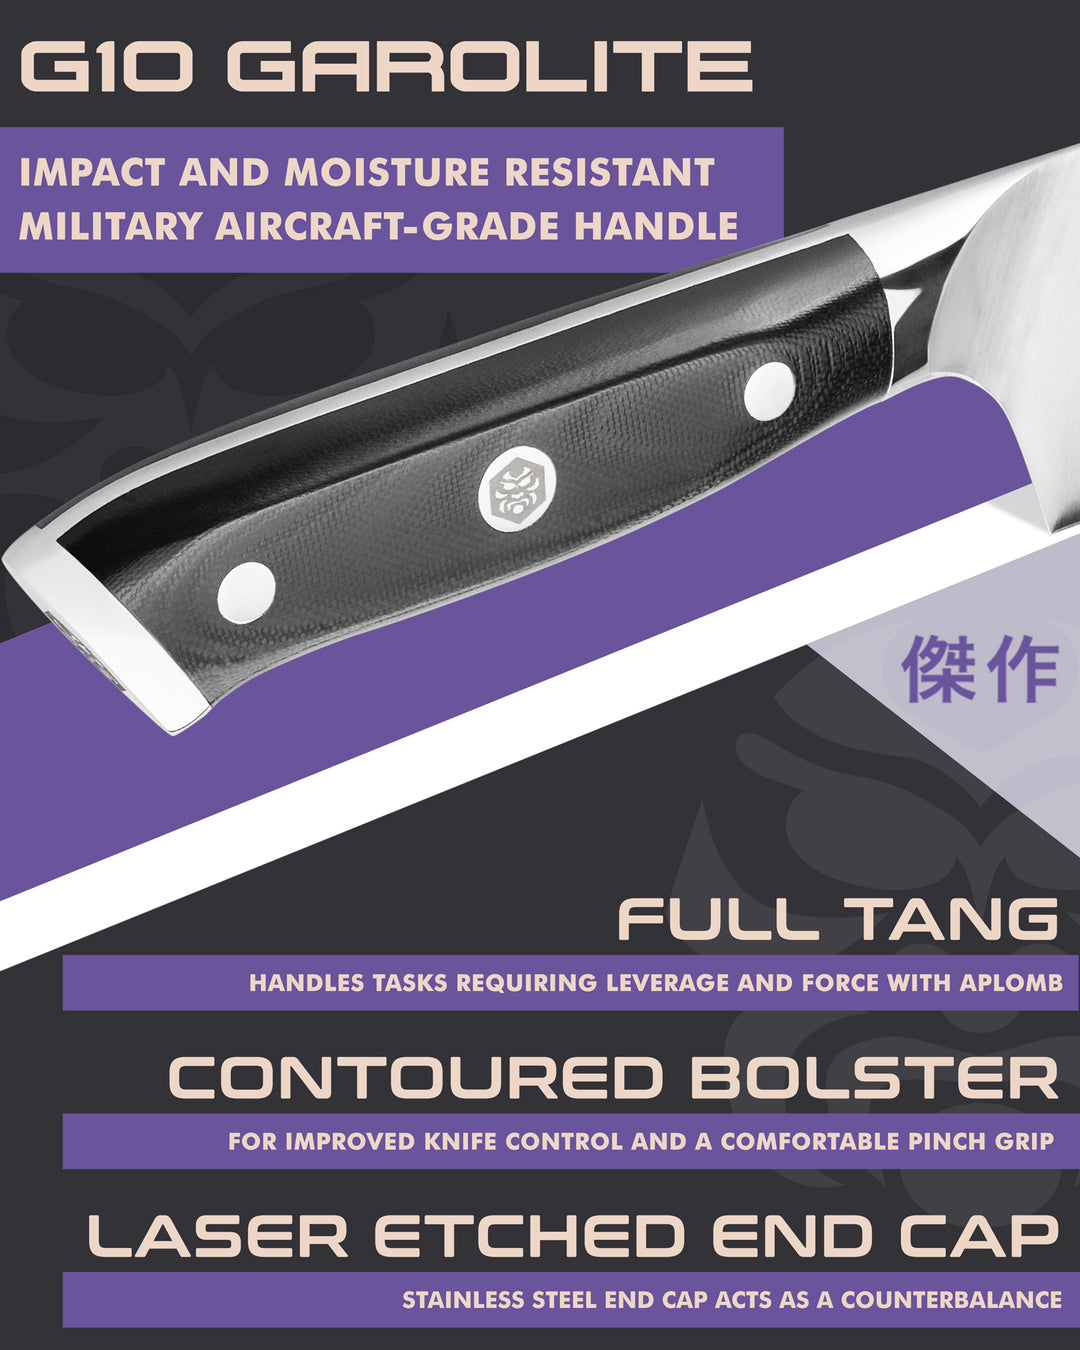 Kessaku Dynasty Produce Knife handle features: G10 handle, full tang, contoured bolster, laser etched end cap